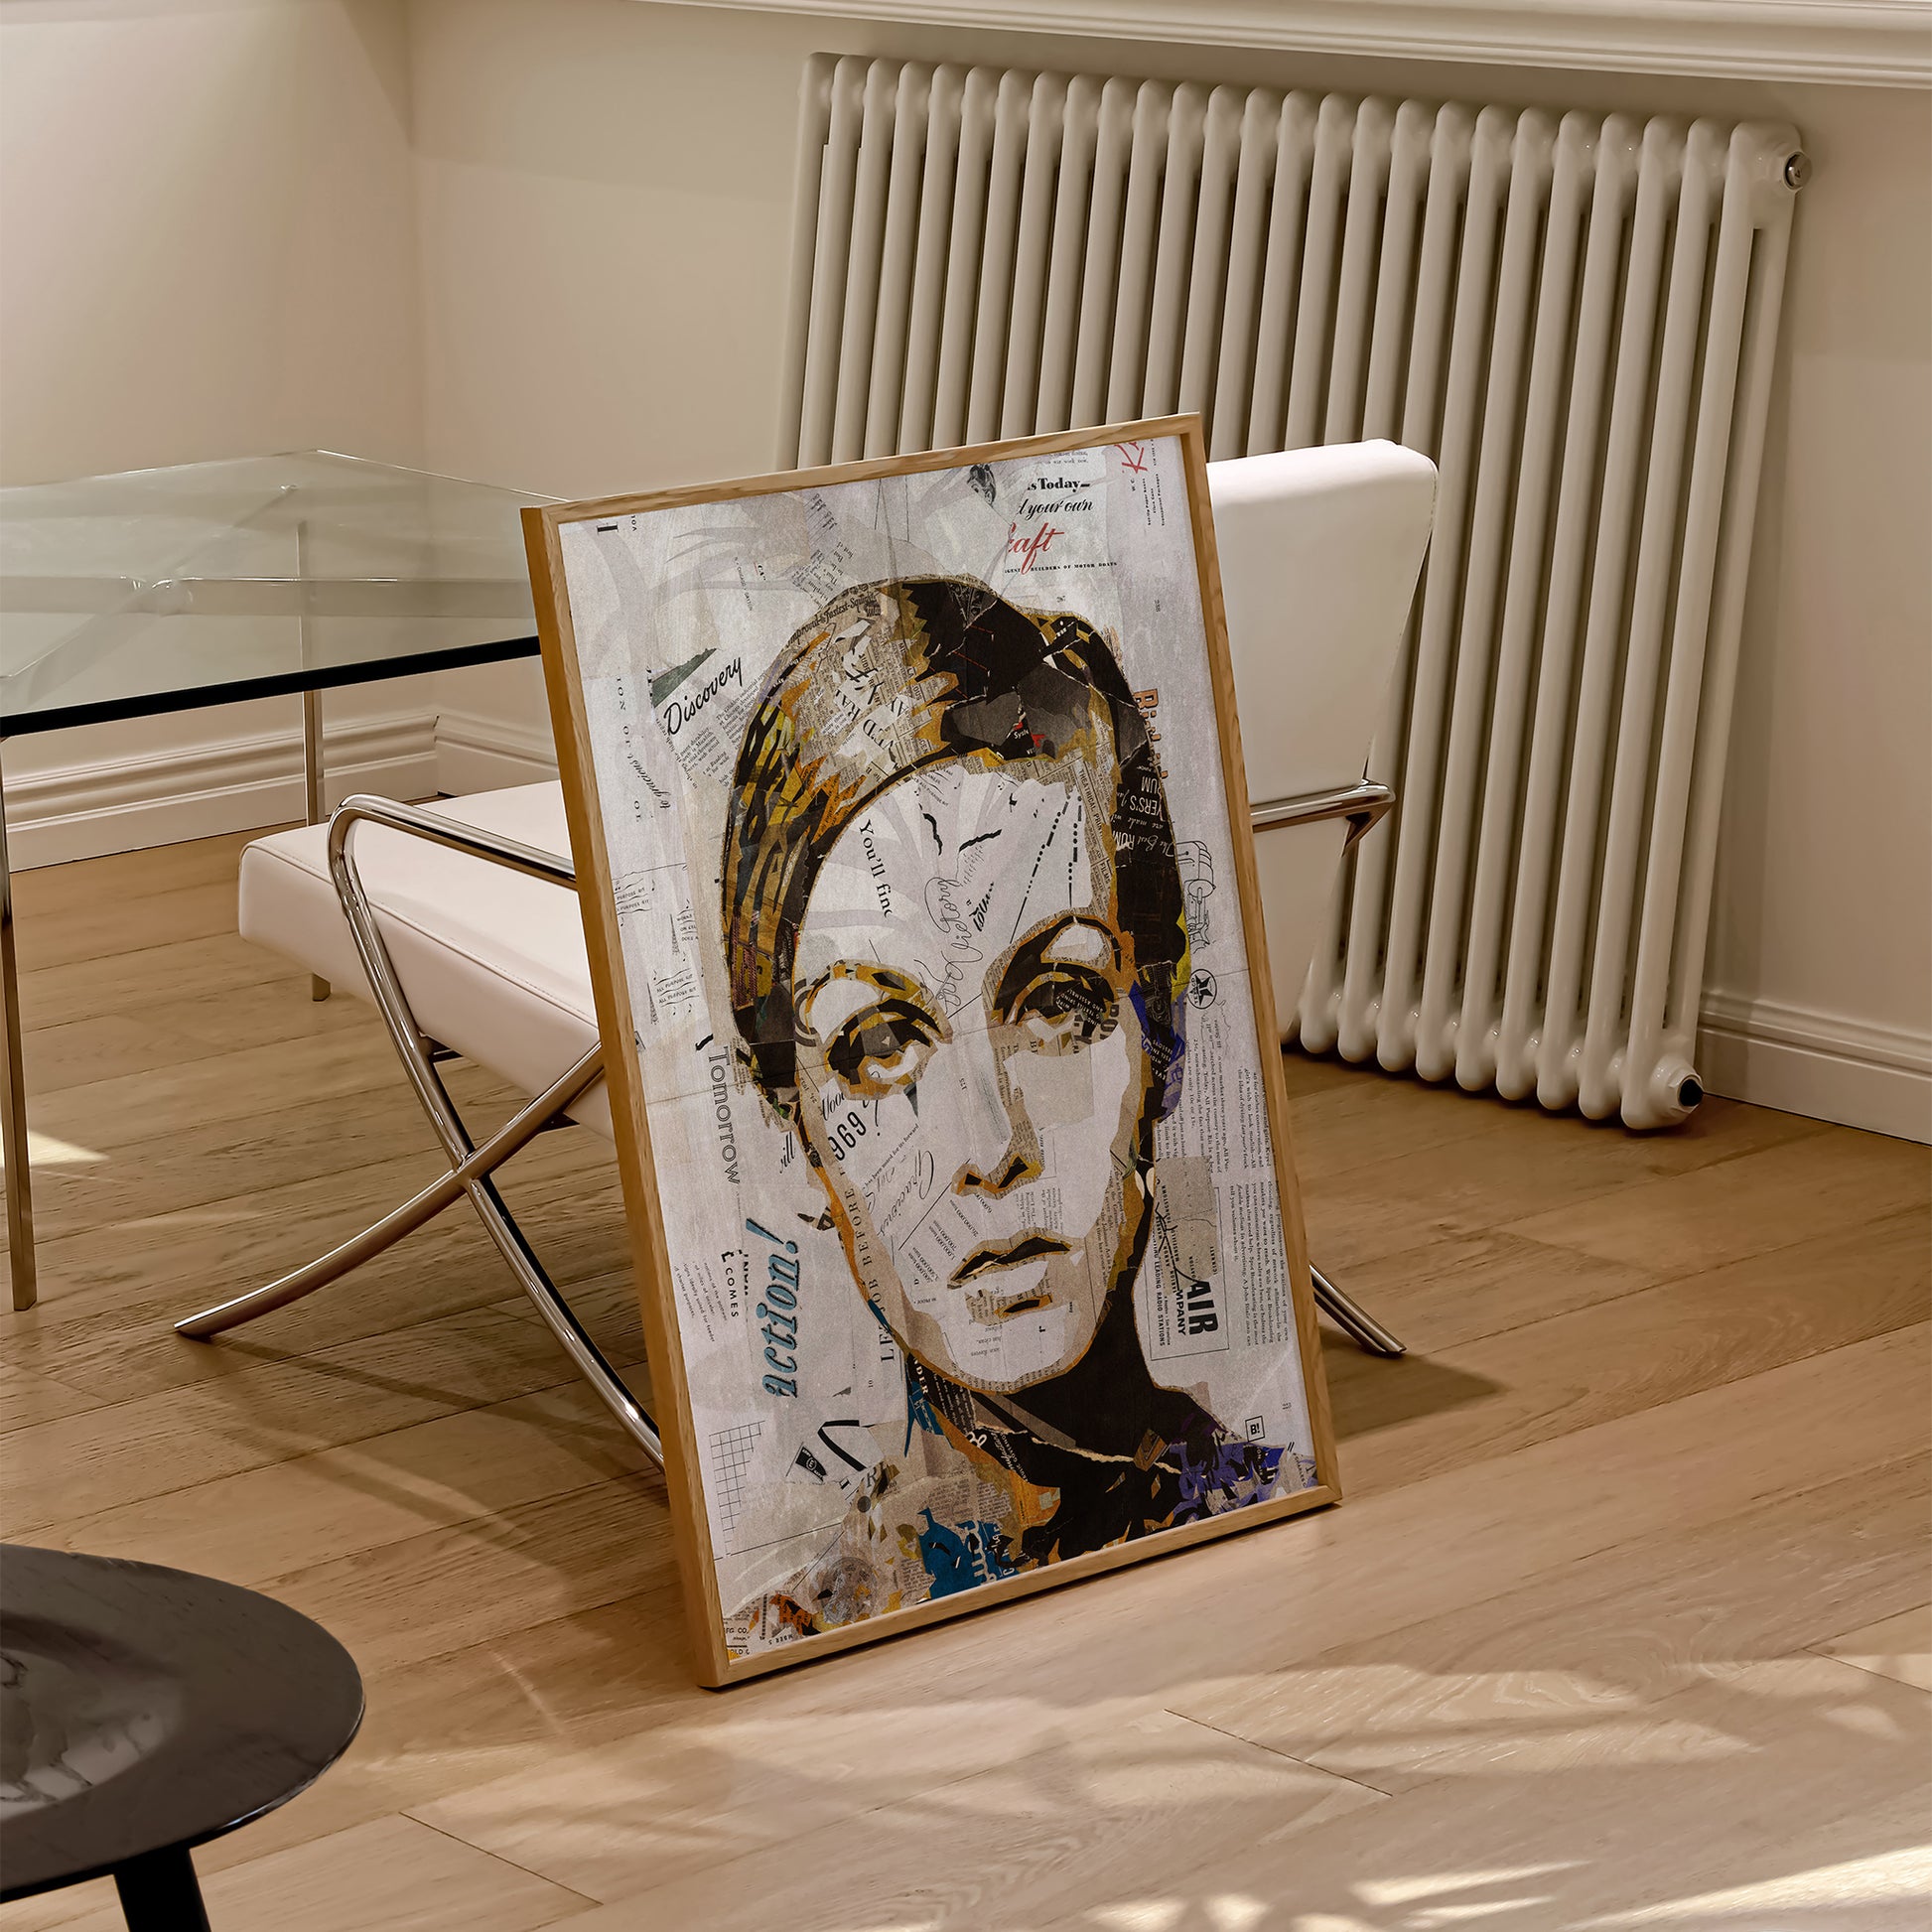 Be inspired by our iconic collage portrait art print of Twiggy. This artwork was printed using the giclée process on archival acid-free paper and is presented in a natural oak frame, capturing its timeless beauty in every detail.